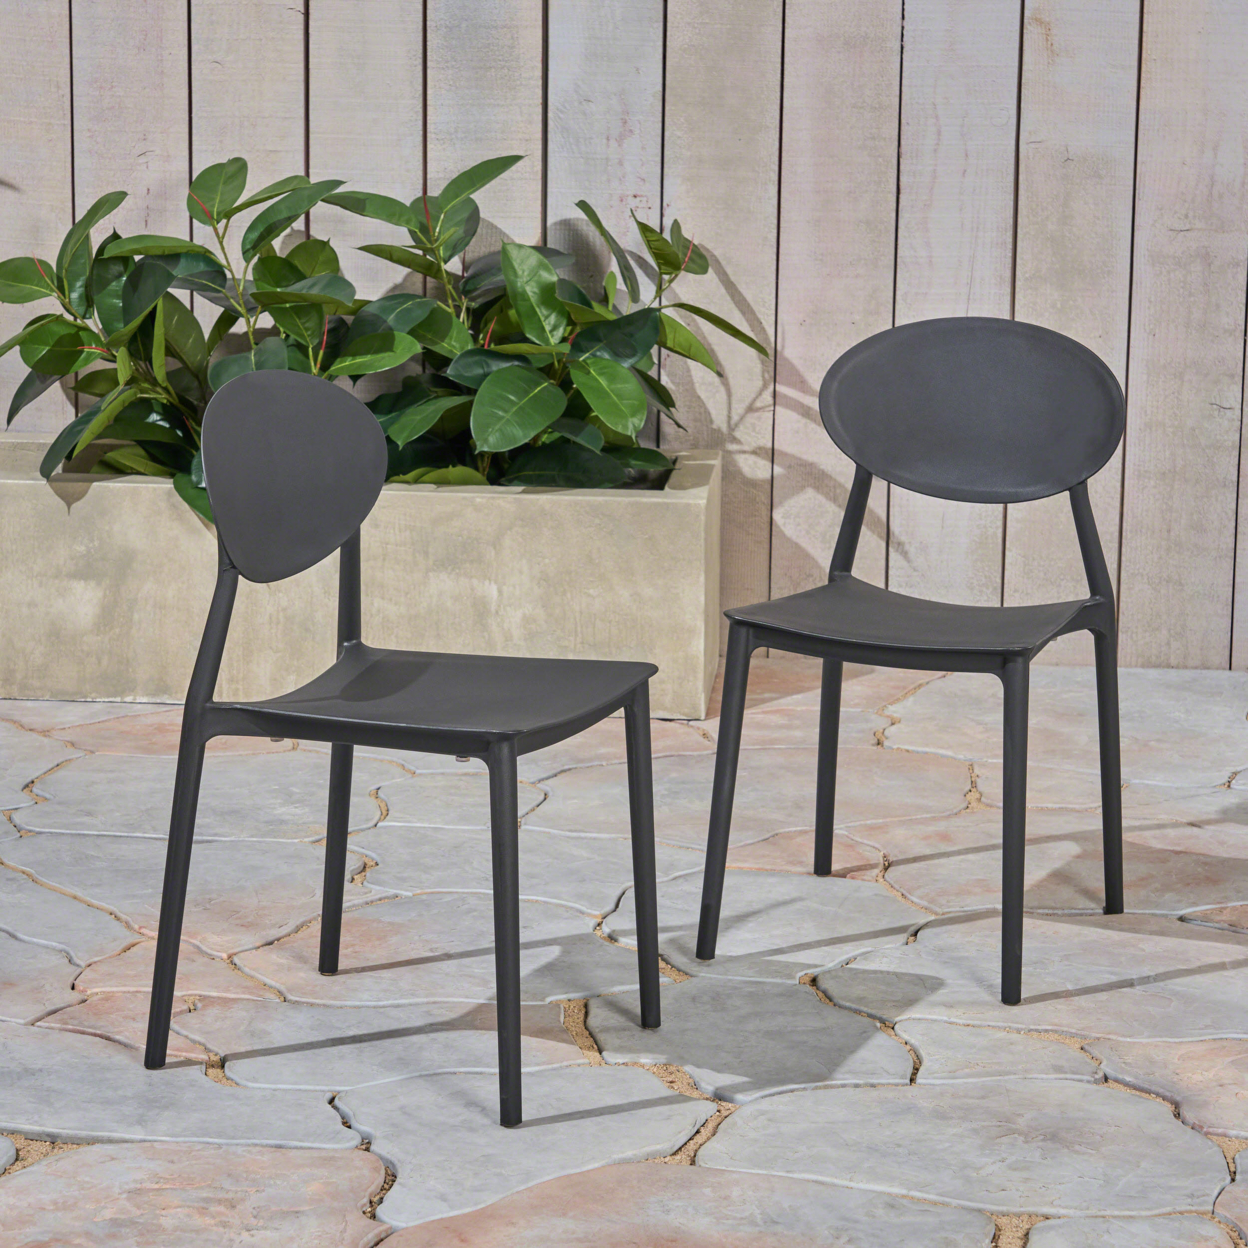 Brynn Outdoor Plastic Chairs (Set Of 2) - Black, Set Of 2